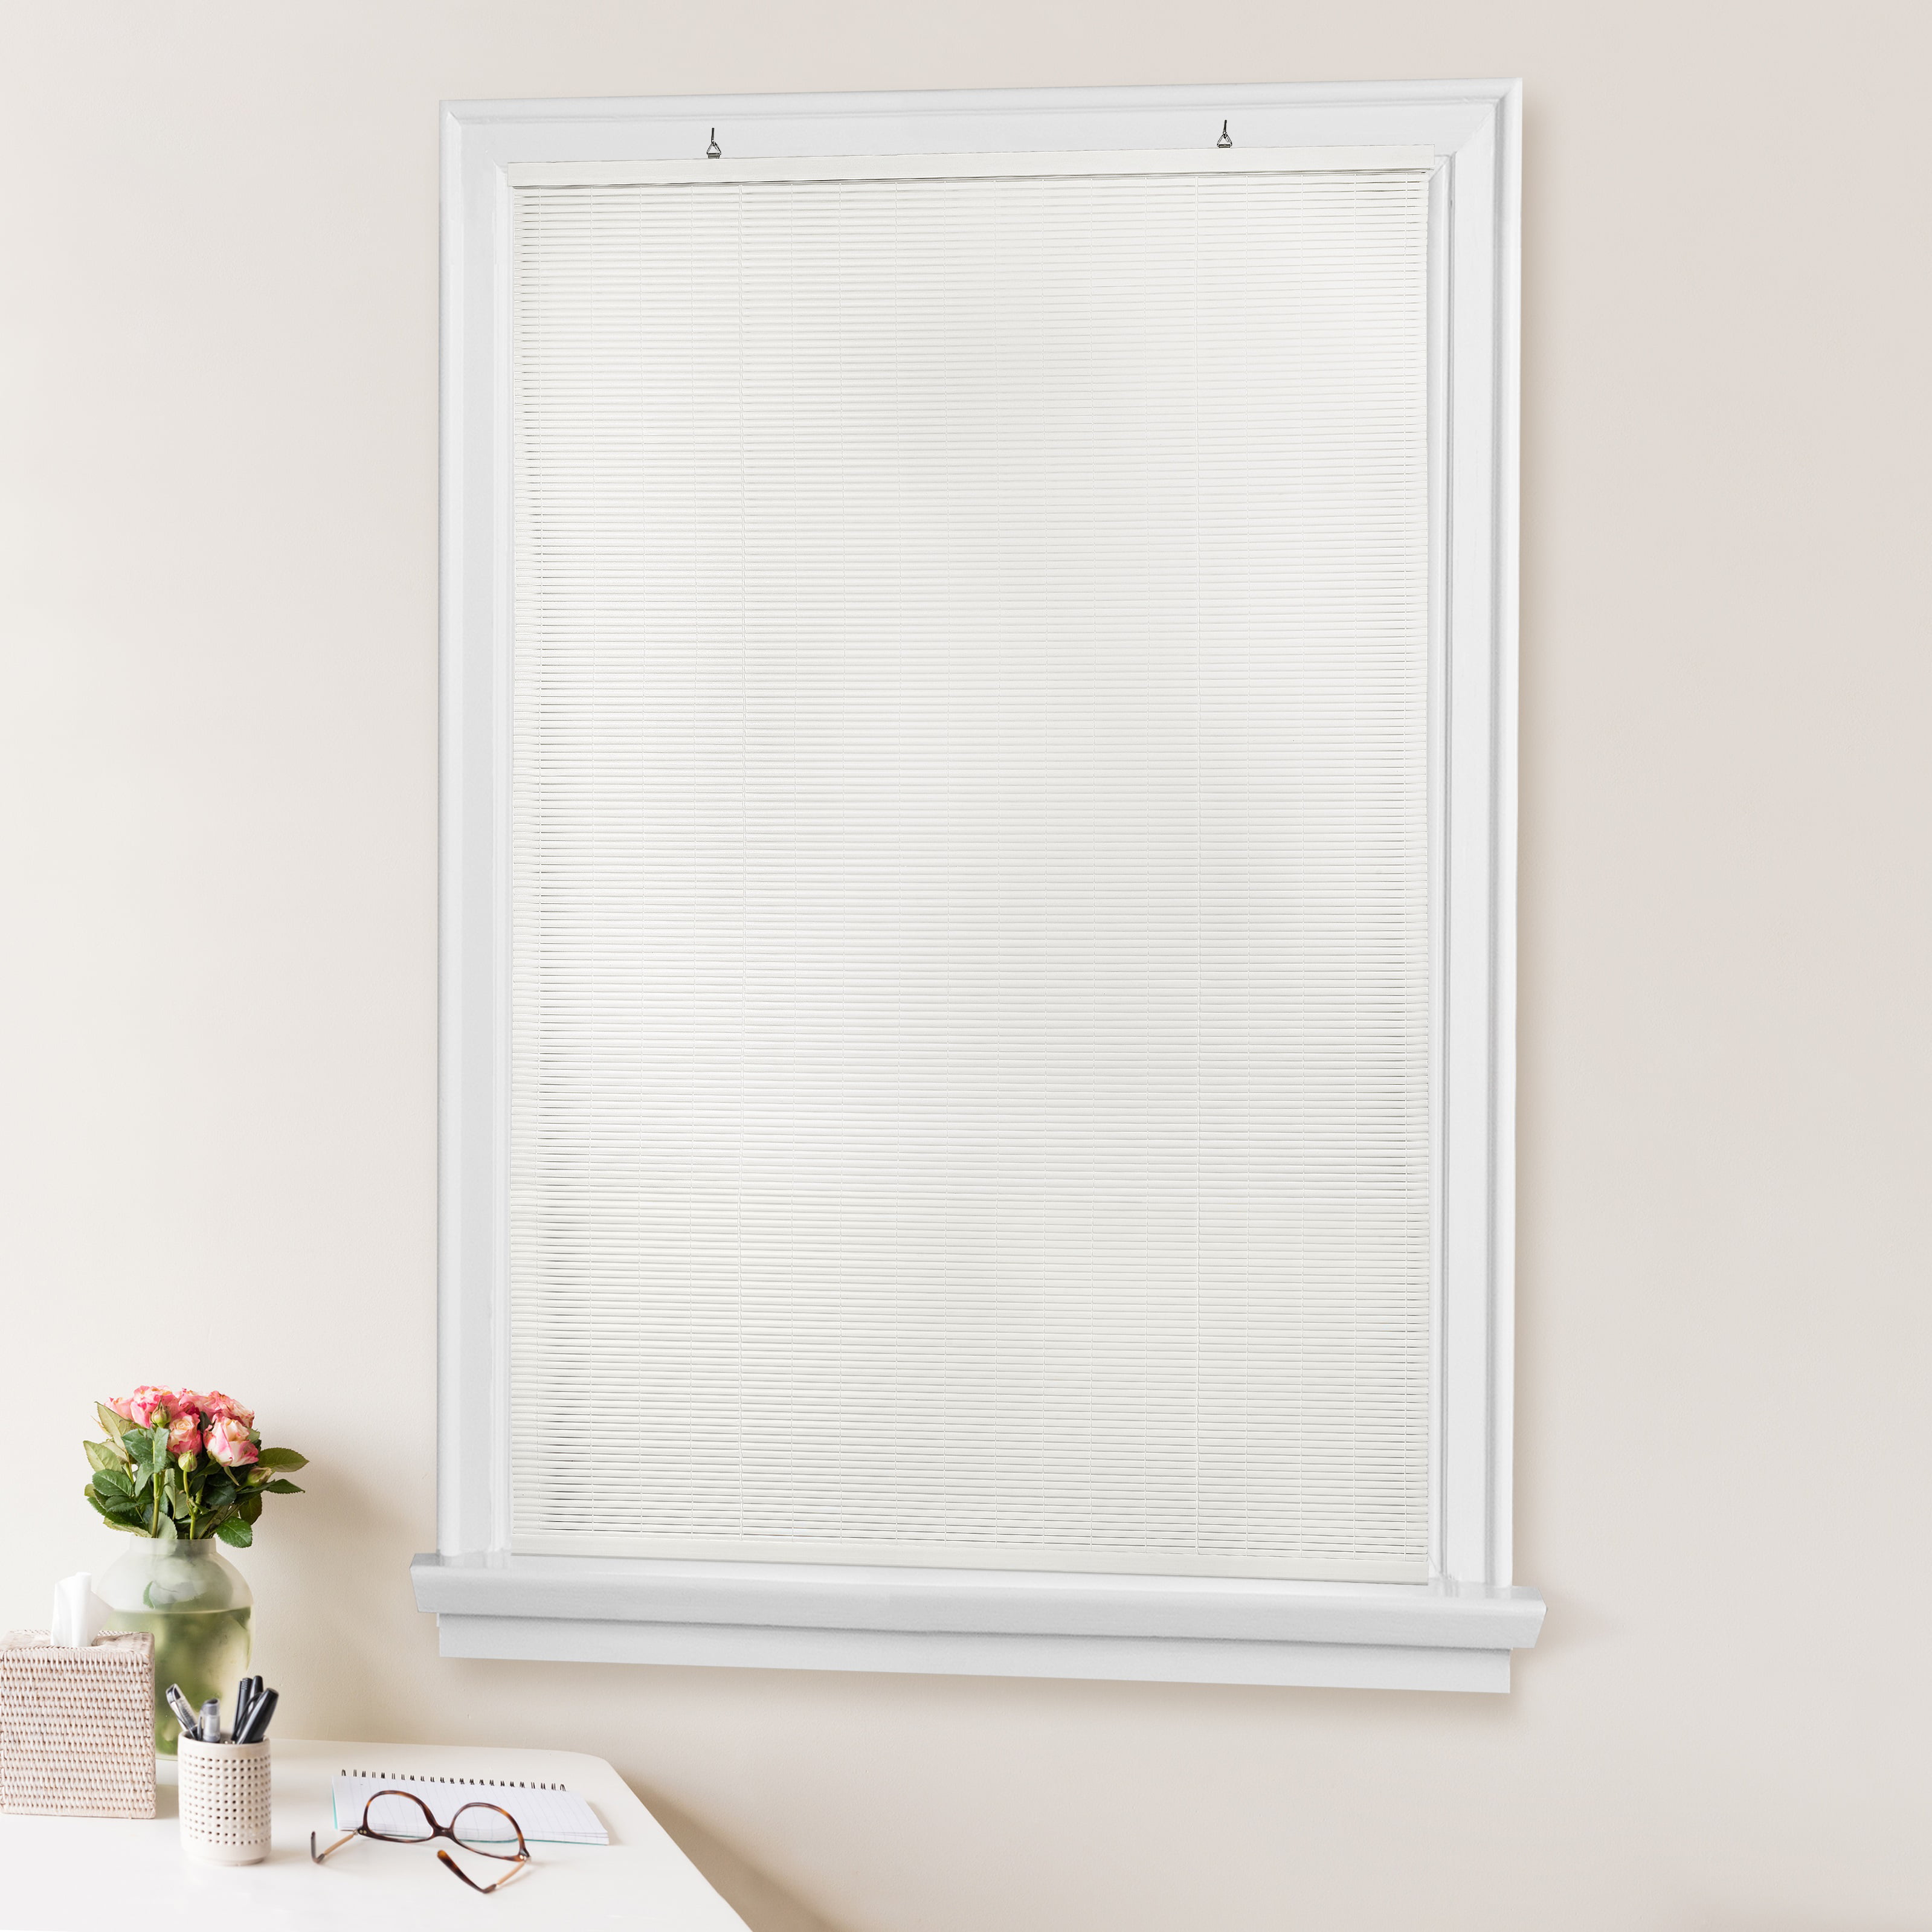 Royal Bath Simple Elegance by Ben&Jonah Cordless Eclipse Collection Vinyl Roll-Up Blind 36"L x 72"W - White